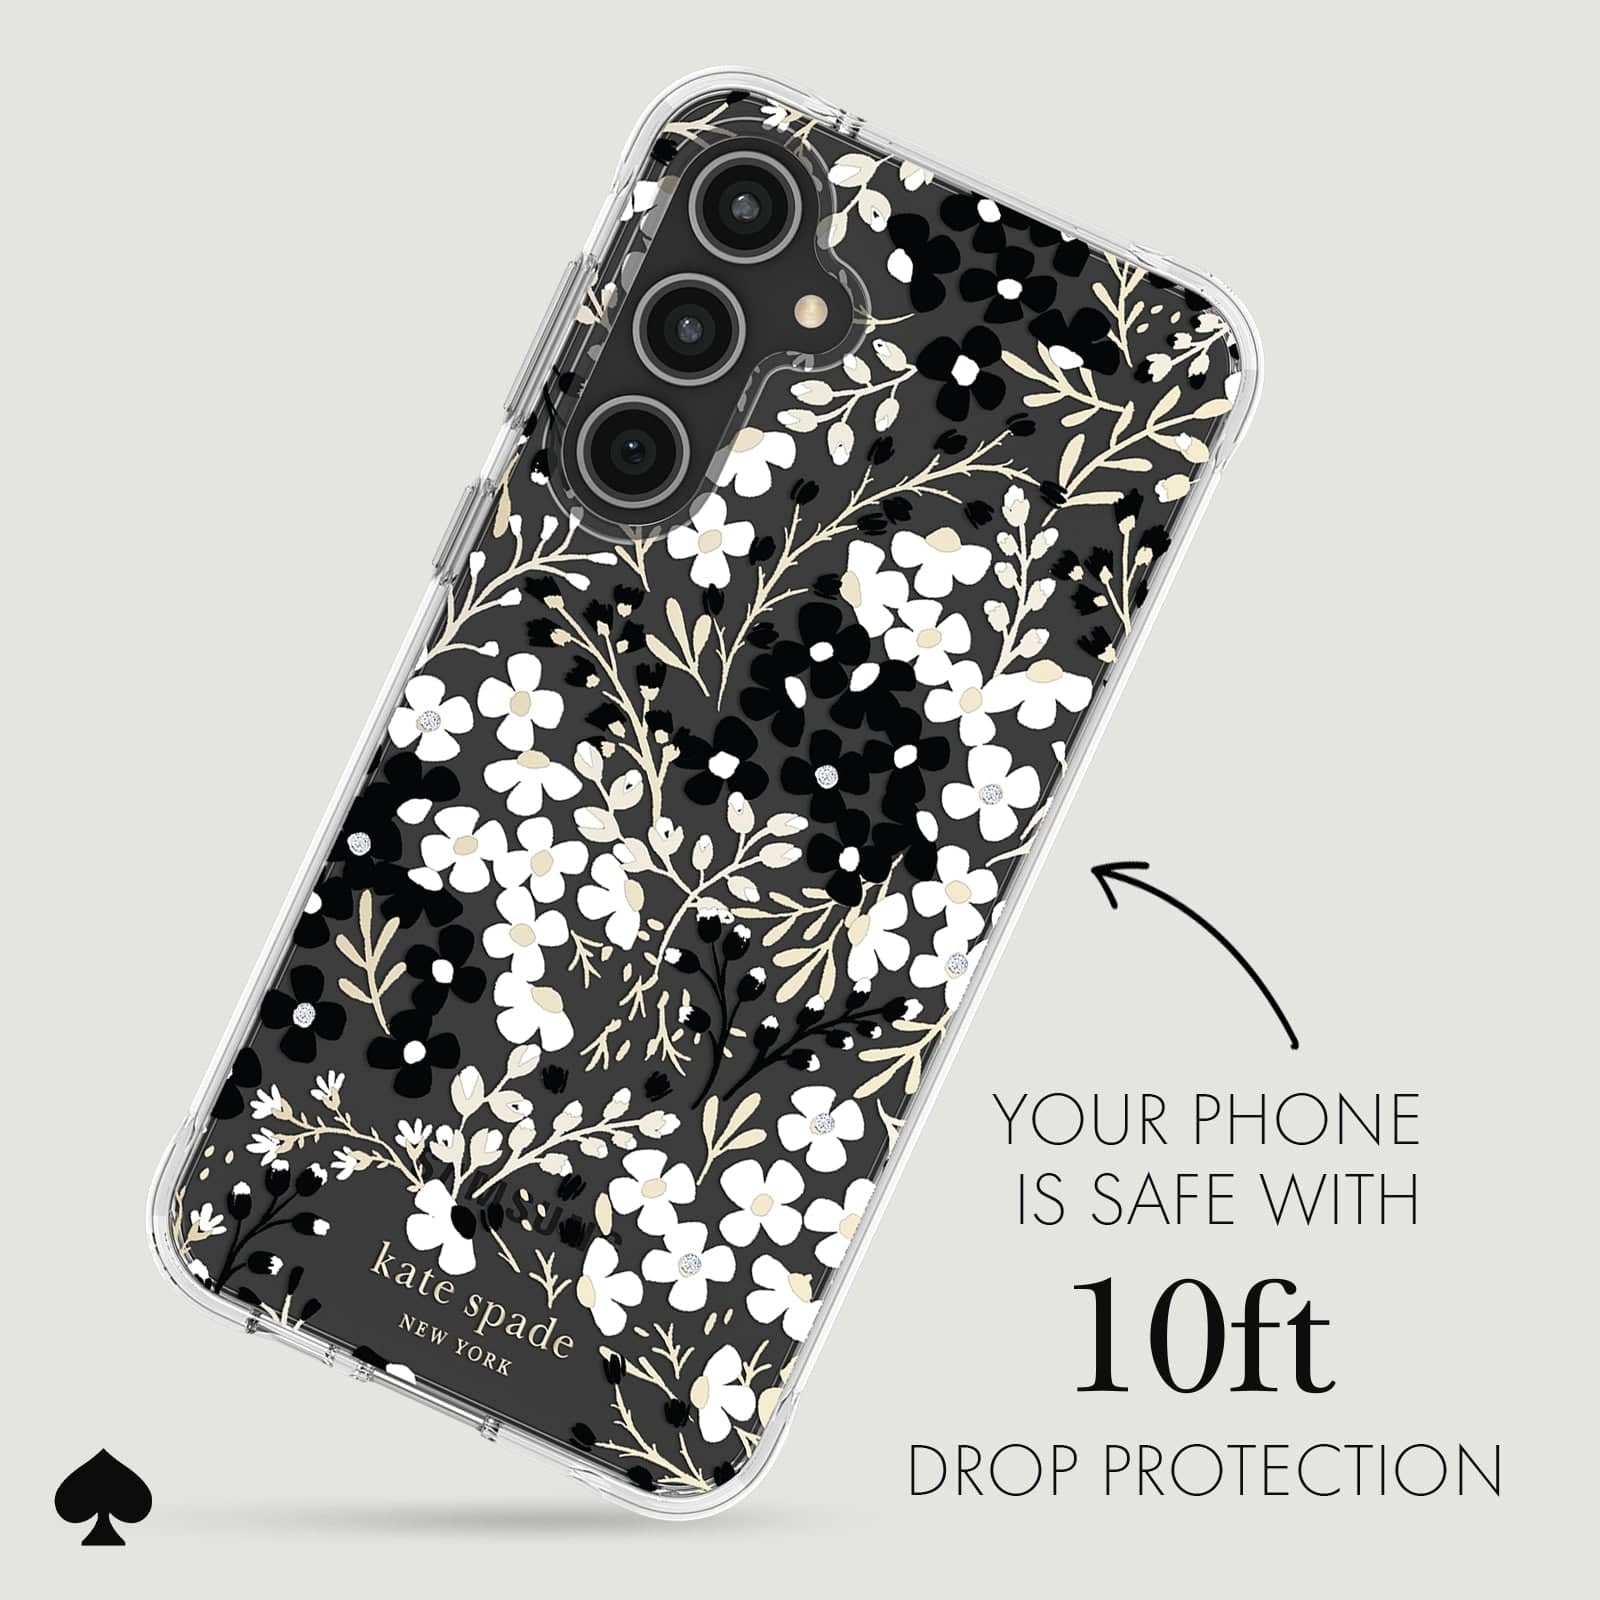 YOUR PHONE IS SAFE WITH 10 FOOT DROP PROTECTION